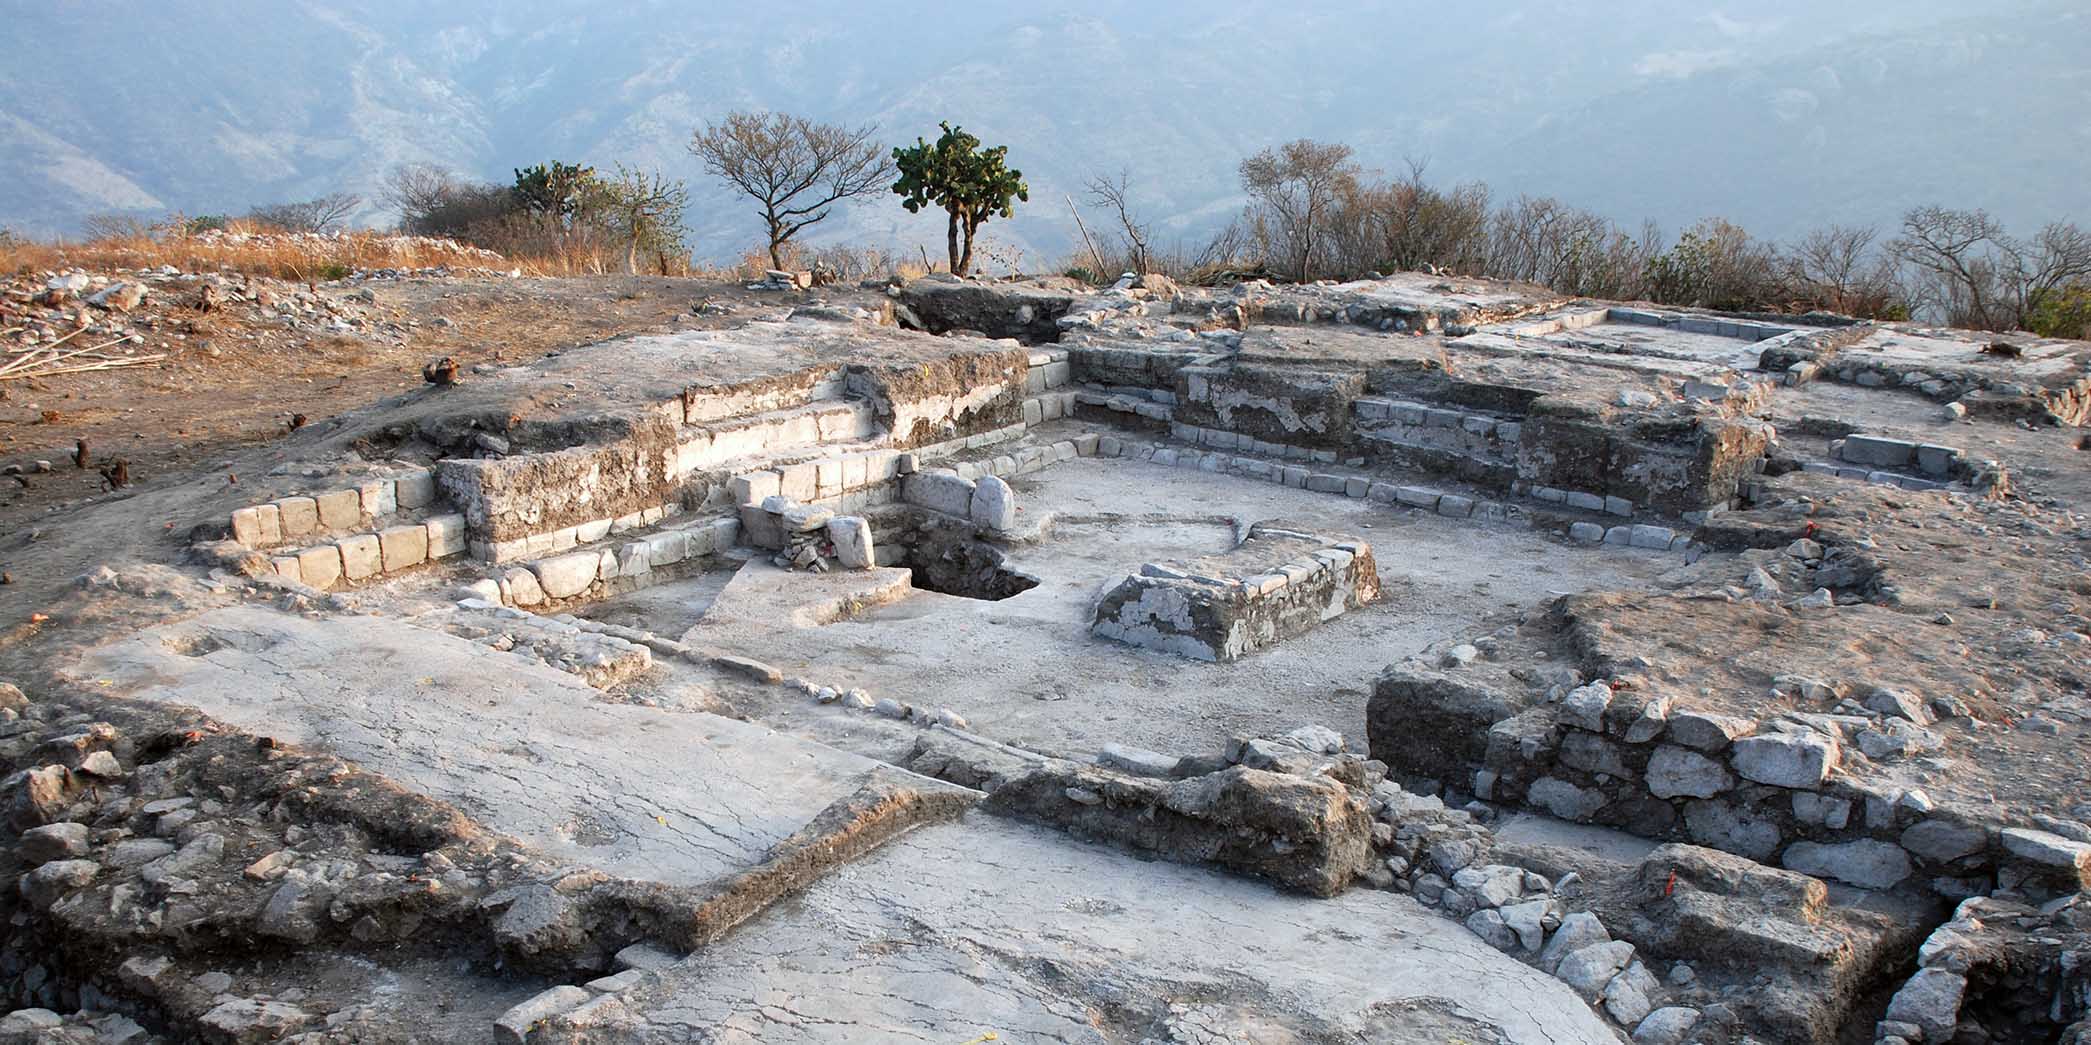 Archaeological ruins in the outline of a house, with trees and mountains in the background